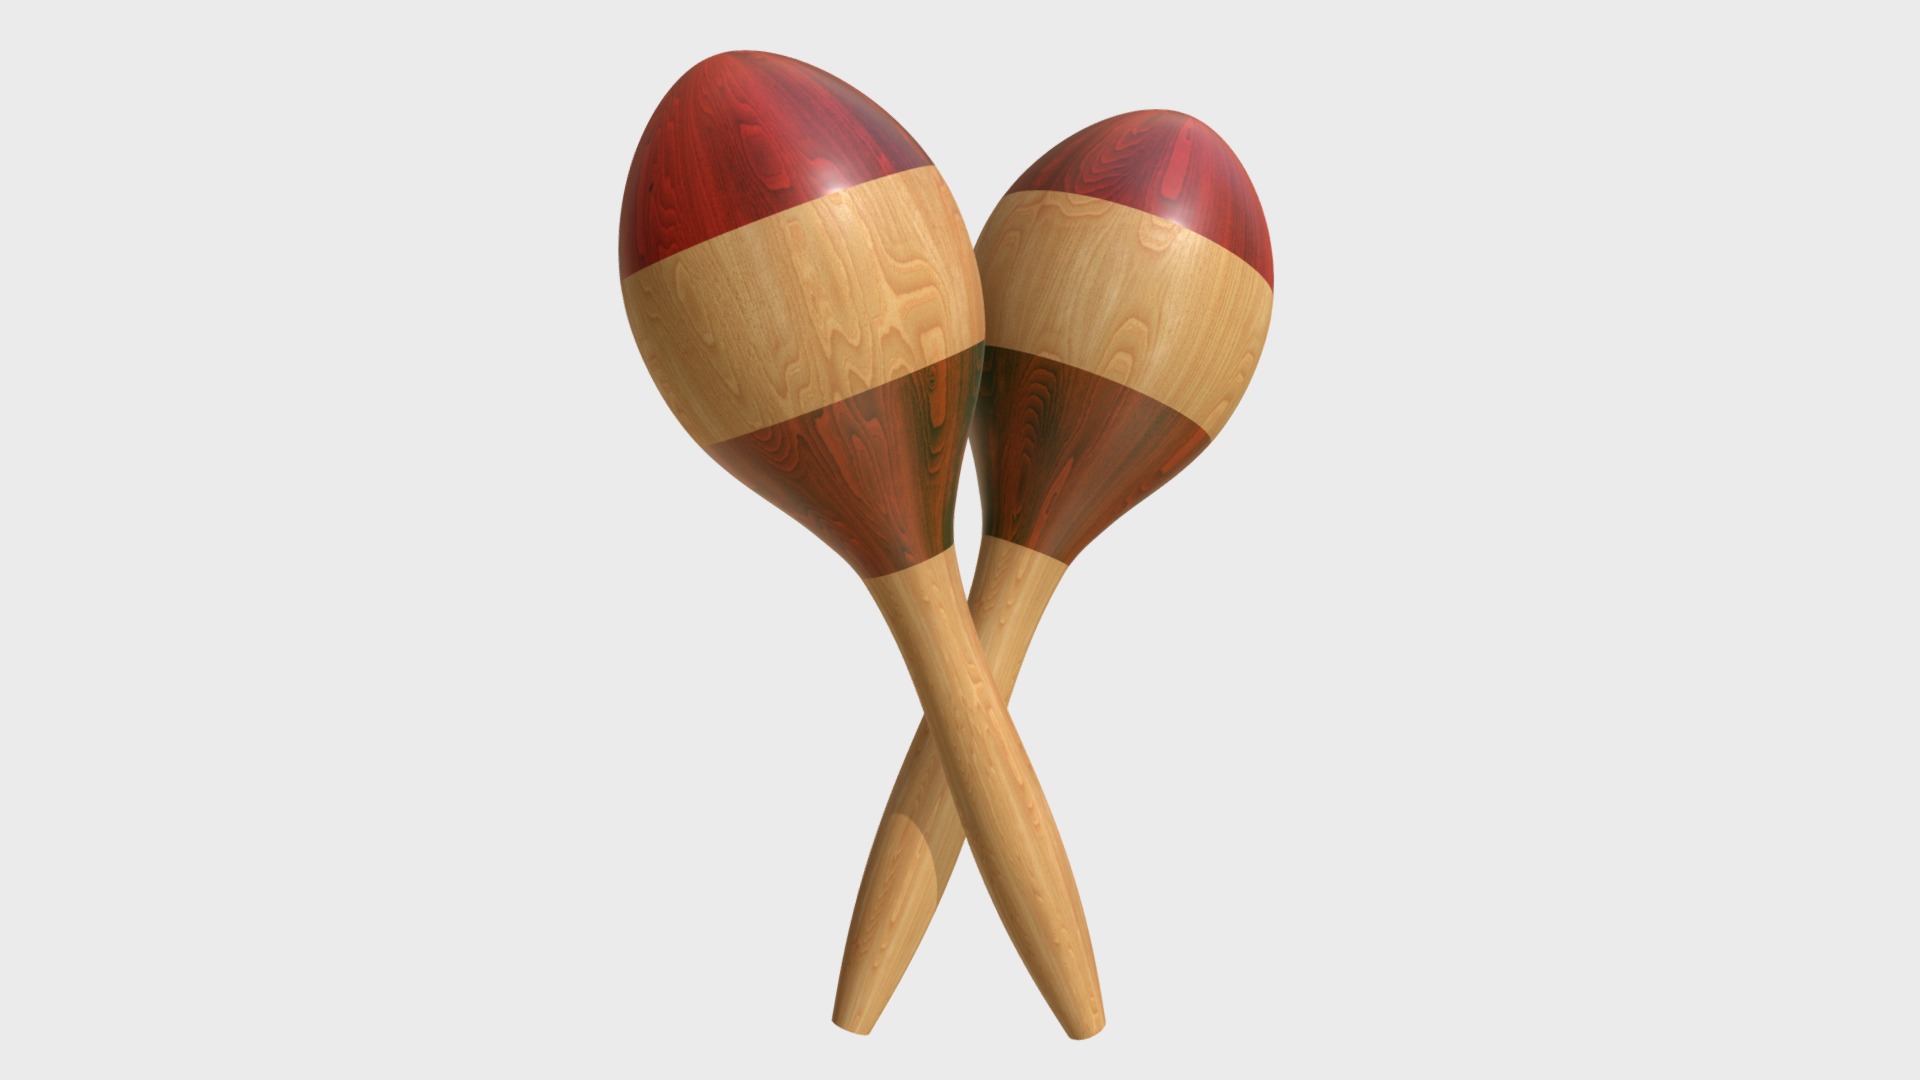 3D model Maracas rumba shakers - This is a 3D model of the Maracas rumba shakers. The 3D model is about a pair of wooden spoons.